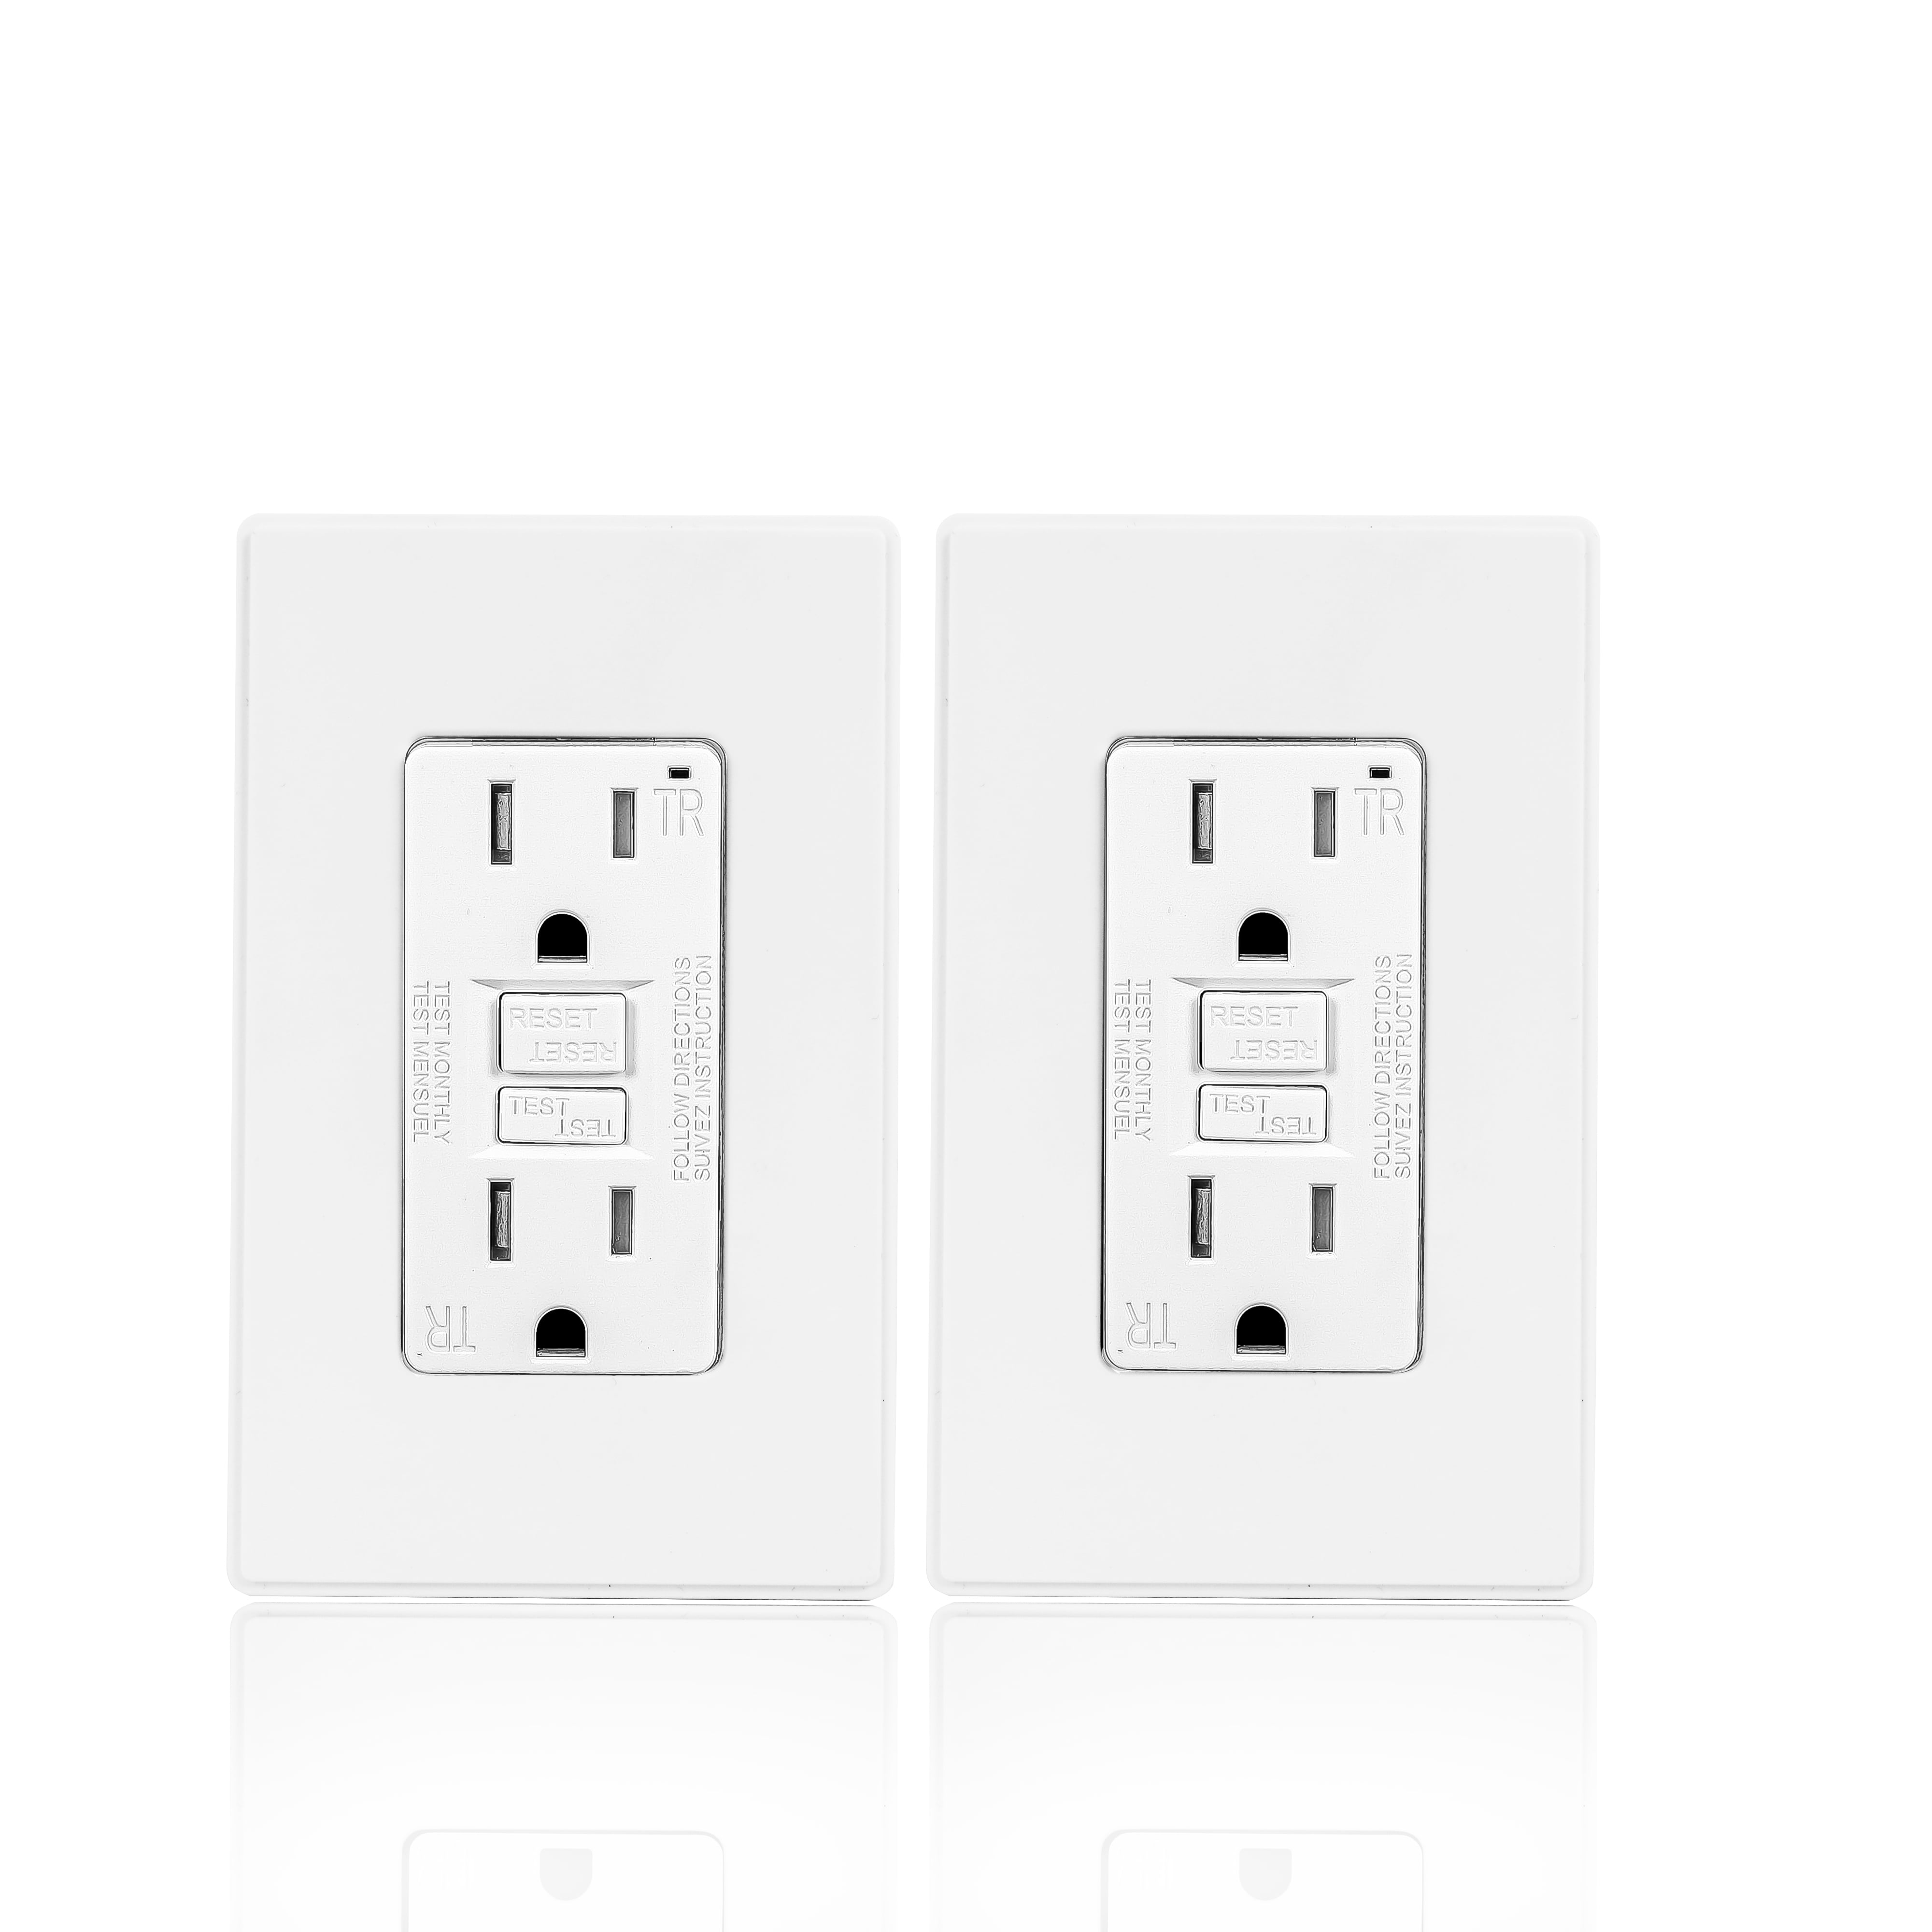 546 Surface Mount Duplex Outlet 15 Amp 125 Volt 2 Wire New LOT OF 2 Brown 